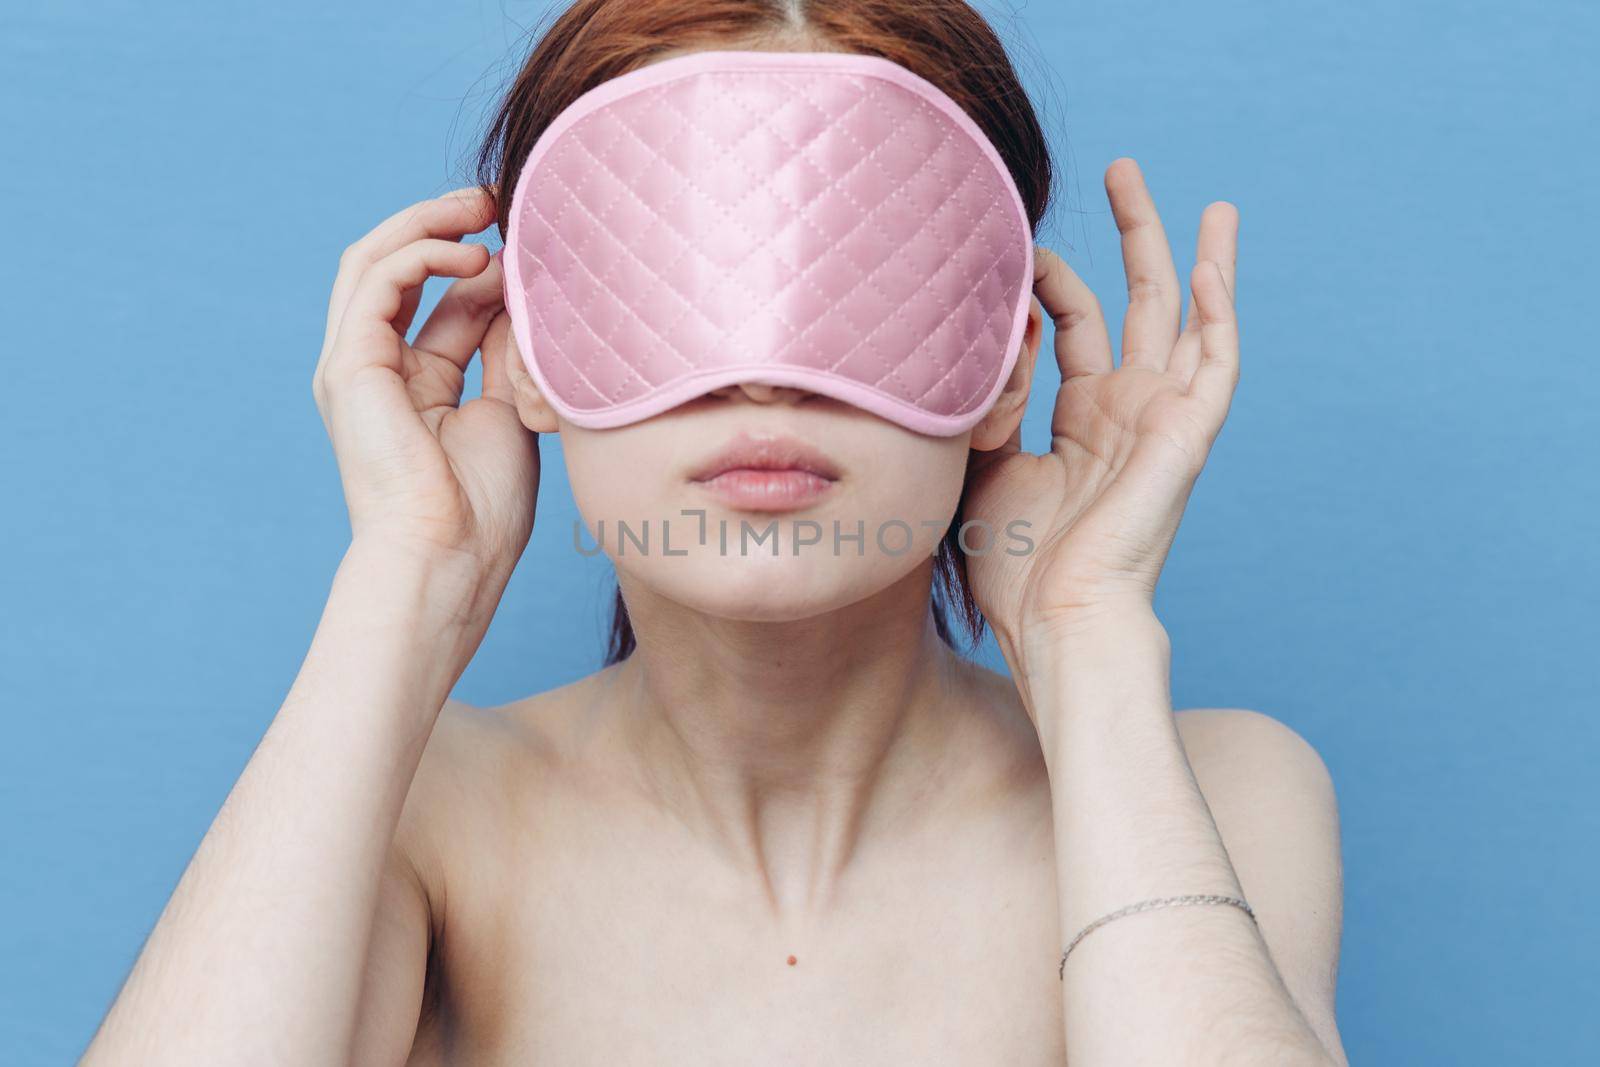 emotional woman with pink sleep mask on her face and blue background model. High quality photo